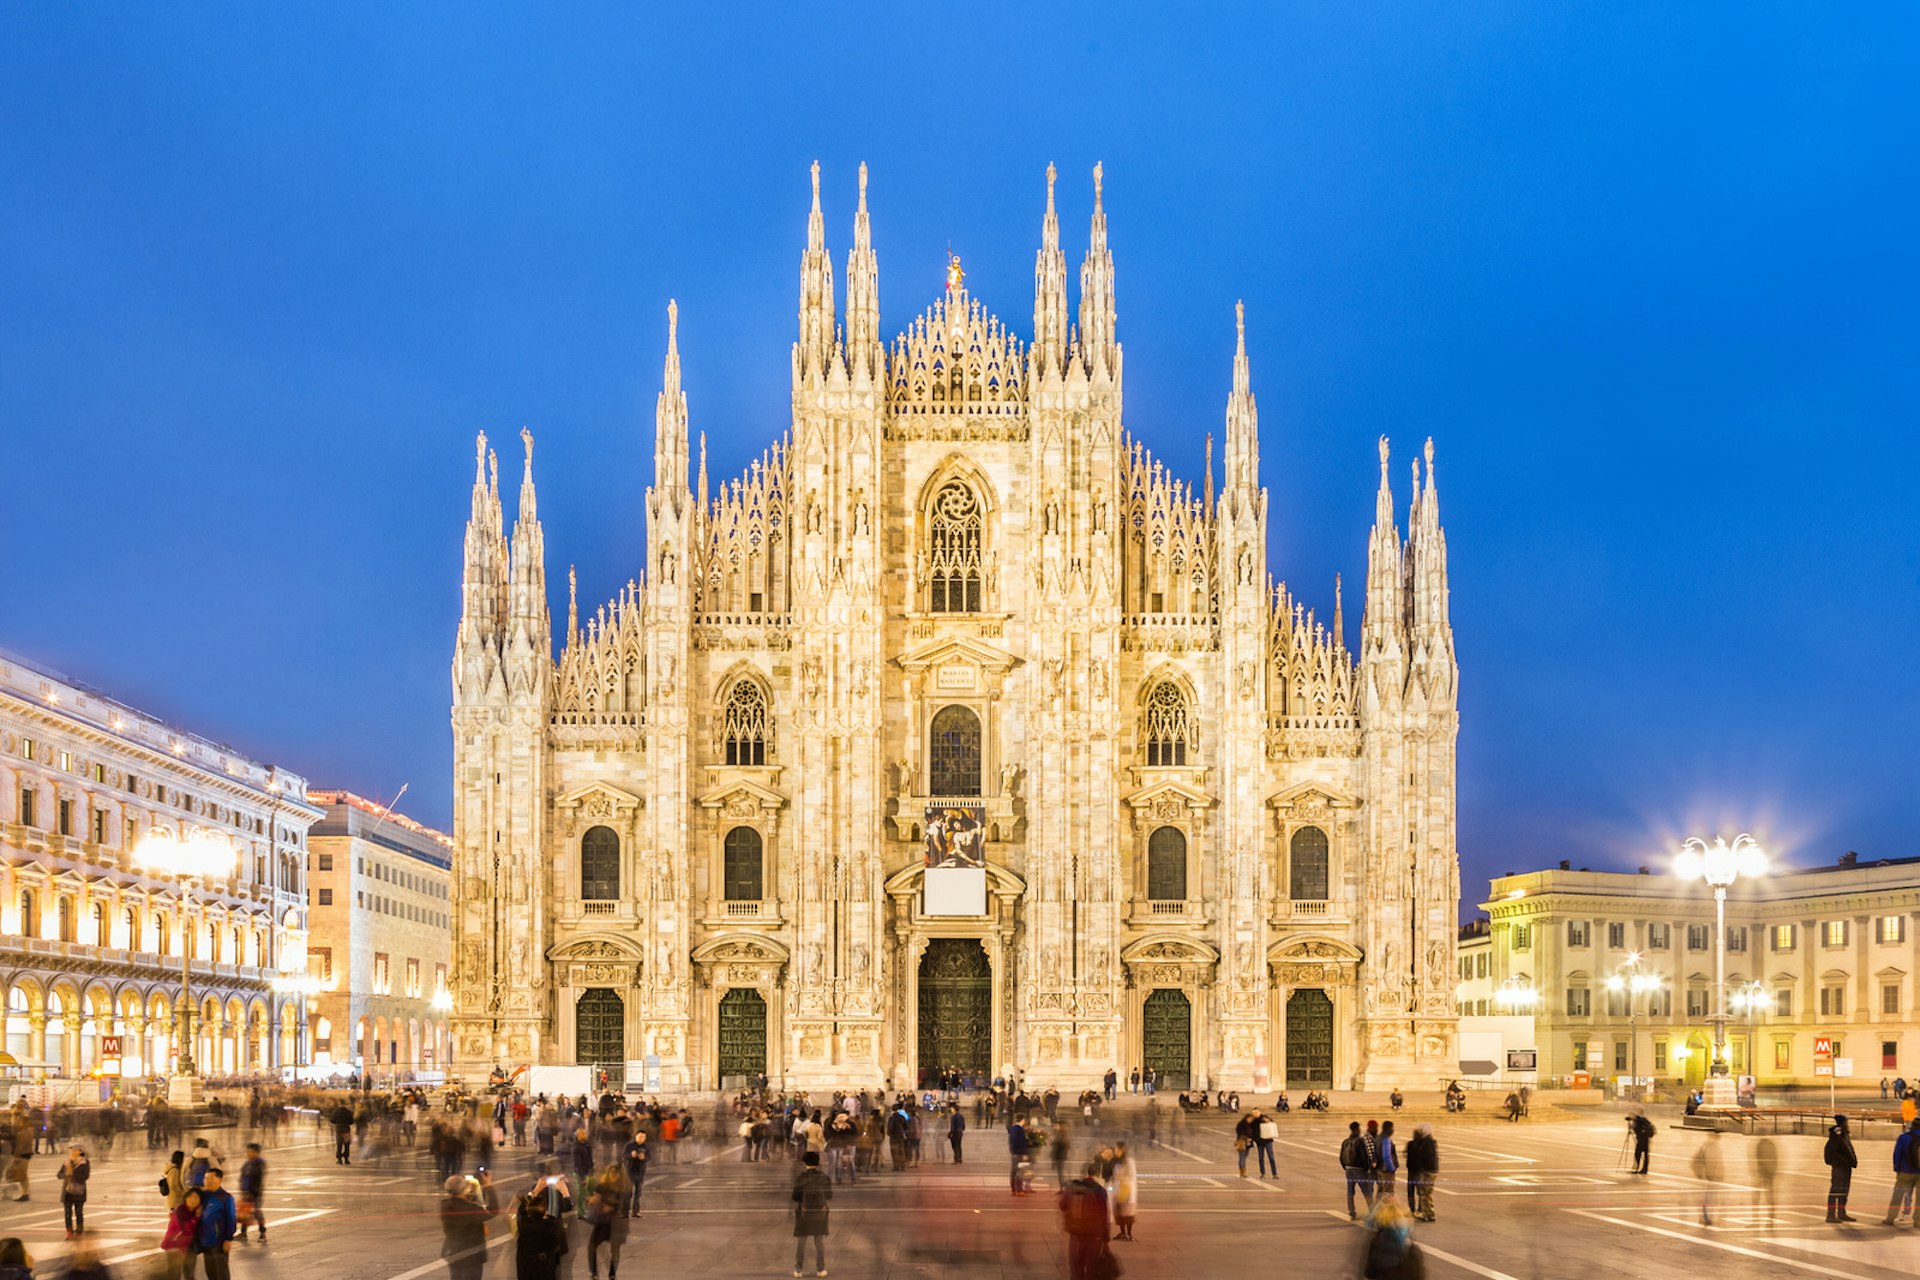 One of the best free things to do in MIlan is admire the Gothic Milan Cathedral; here it is pictured as night falls; its illuminated white marble facade is adorned with many spires and statues; people fill the piazza in front of the cathedral.